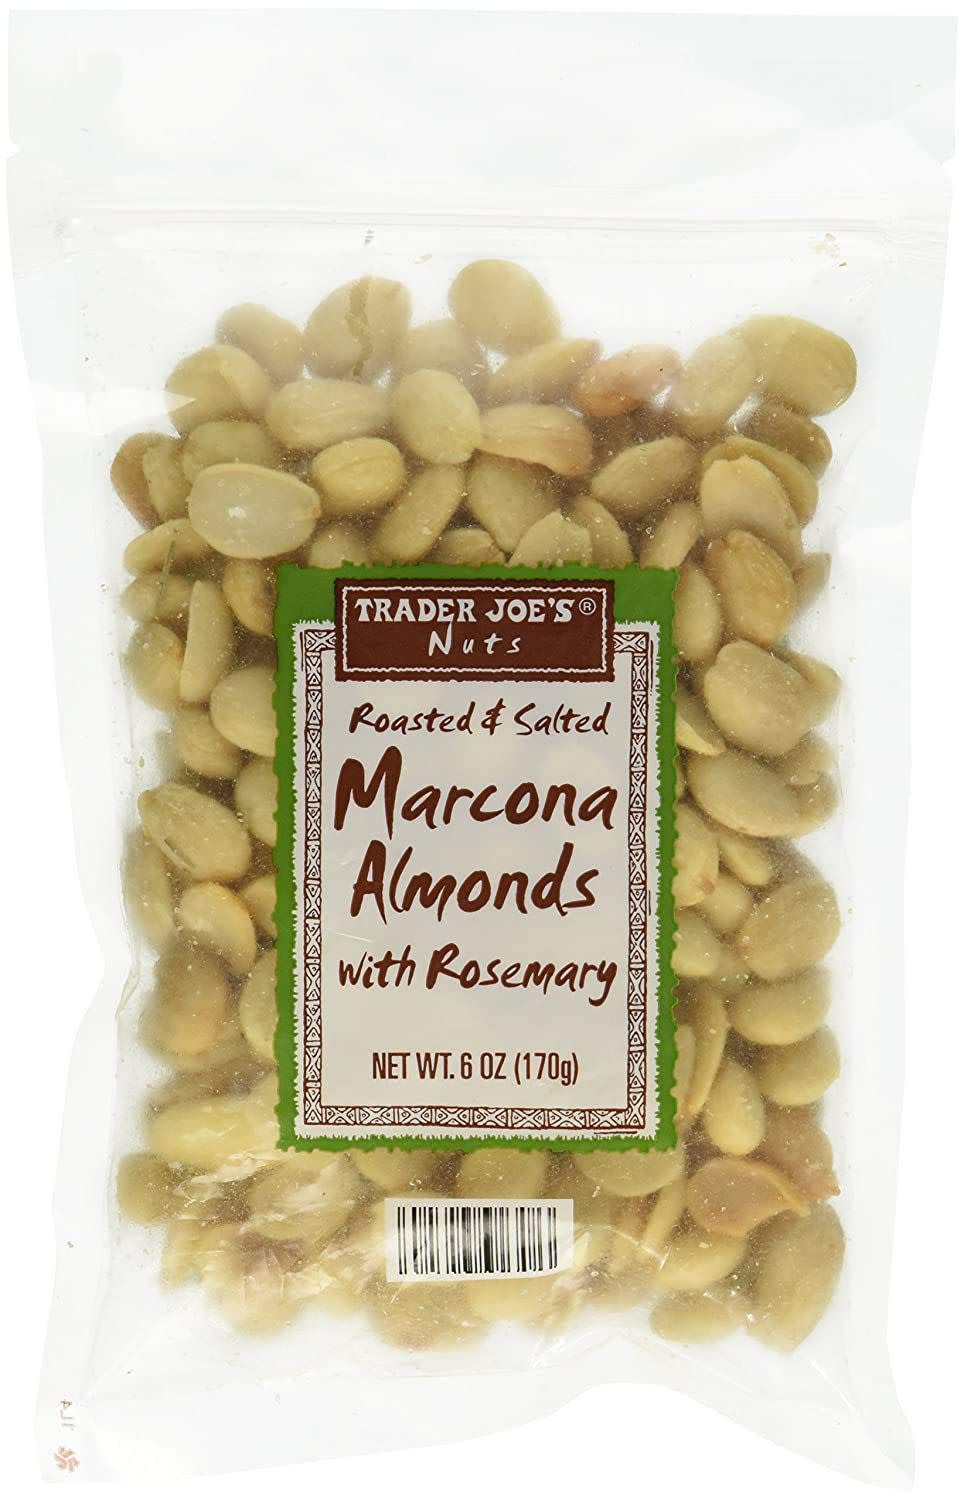 Trader Joe's Roasted and Salted Marcona Almonds with Rosemary